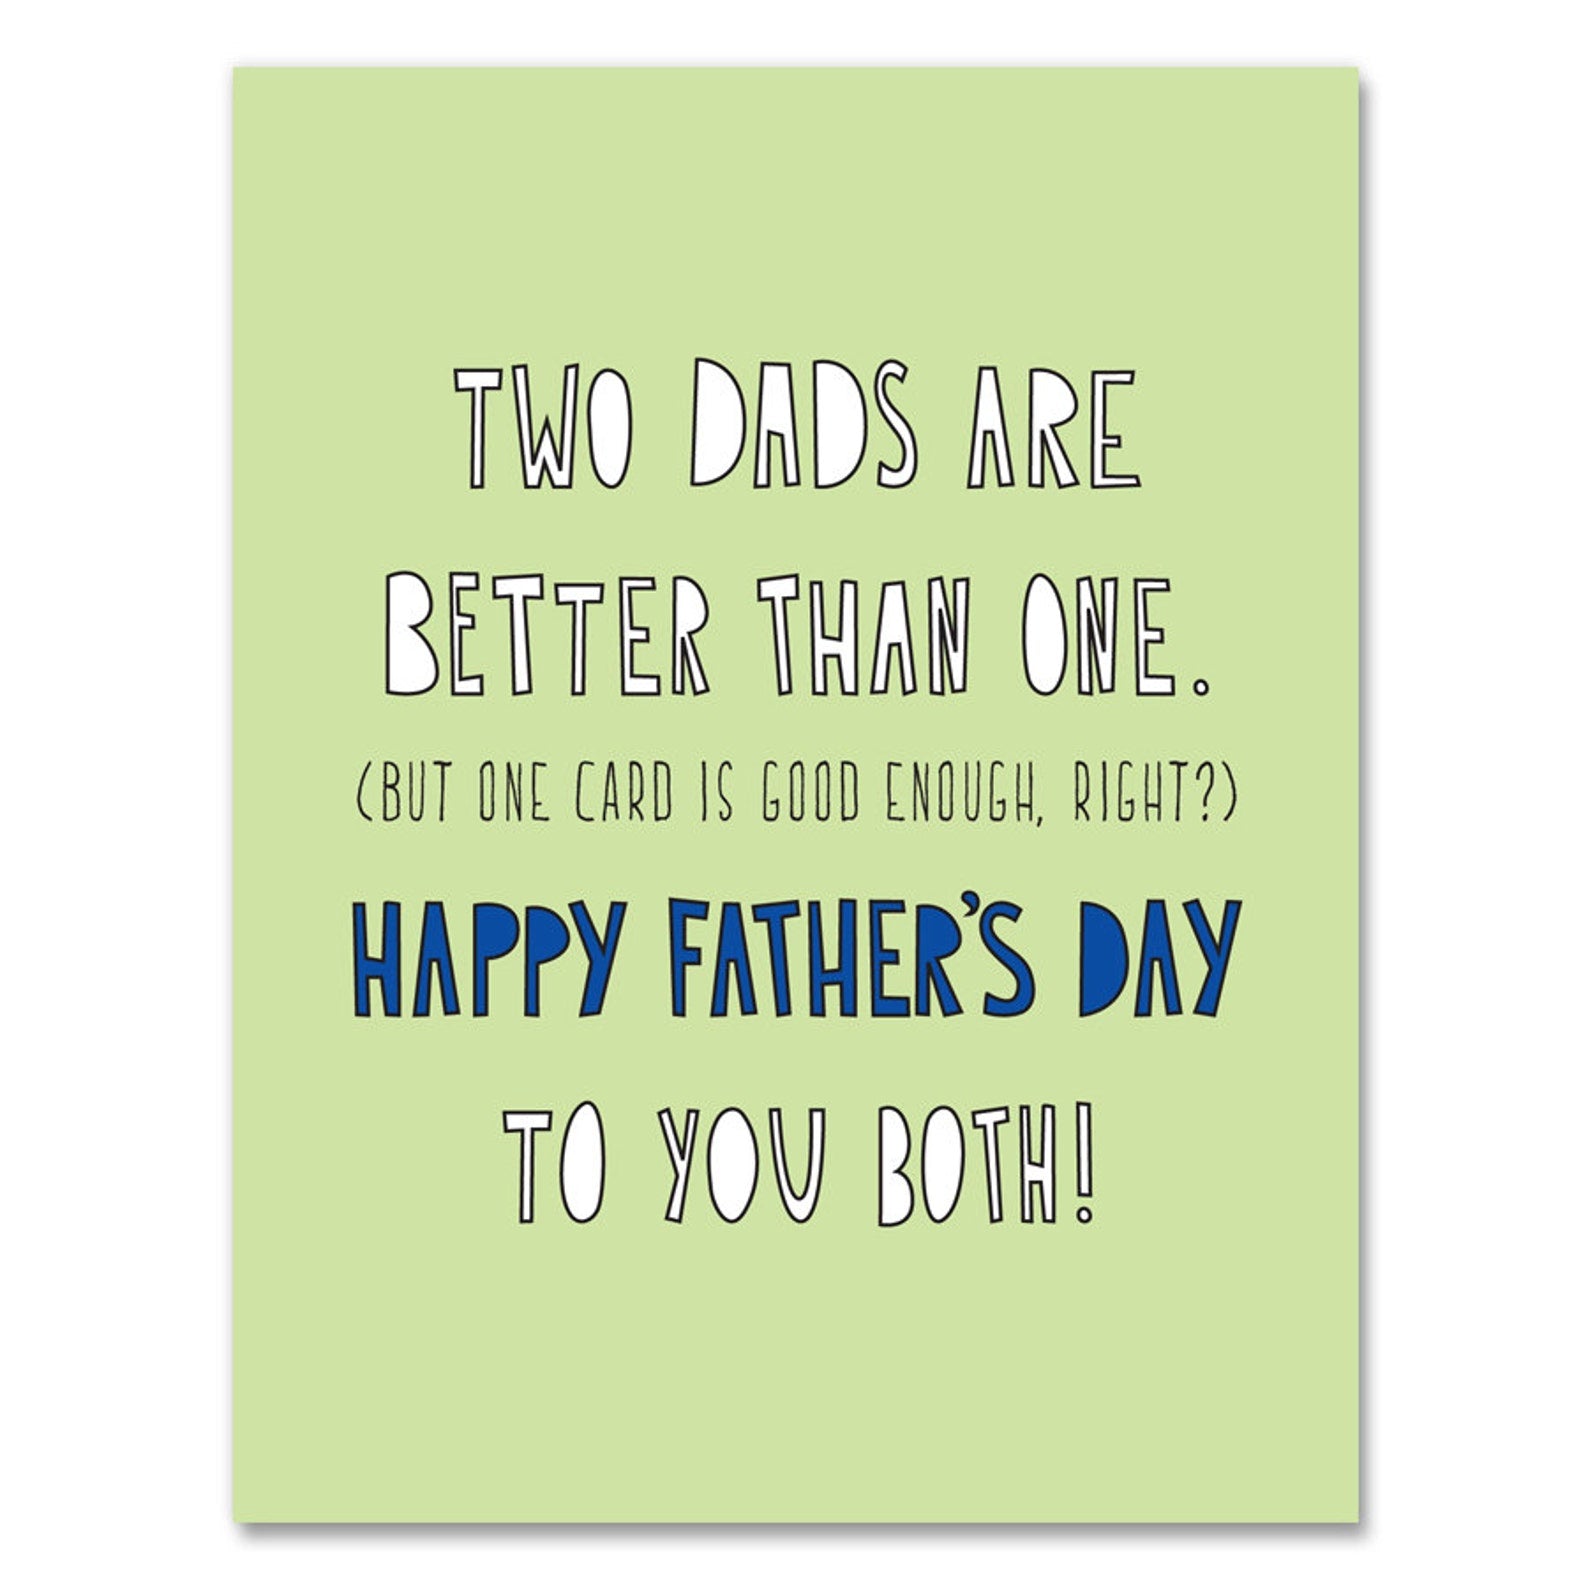 Two Dads Are Better Than One... Card